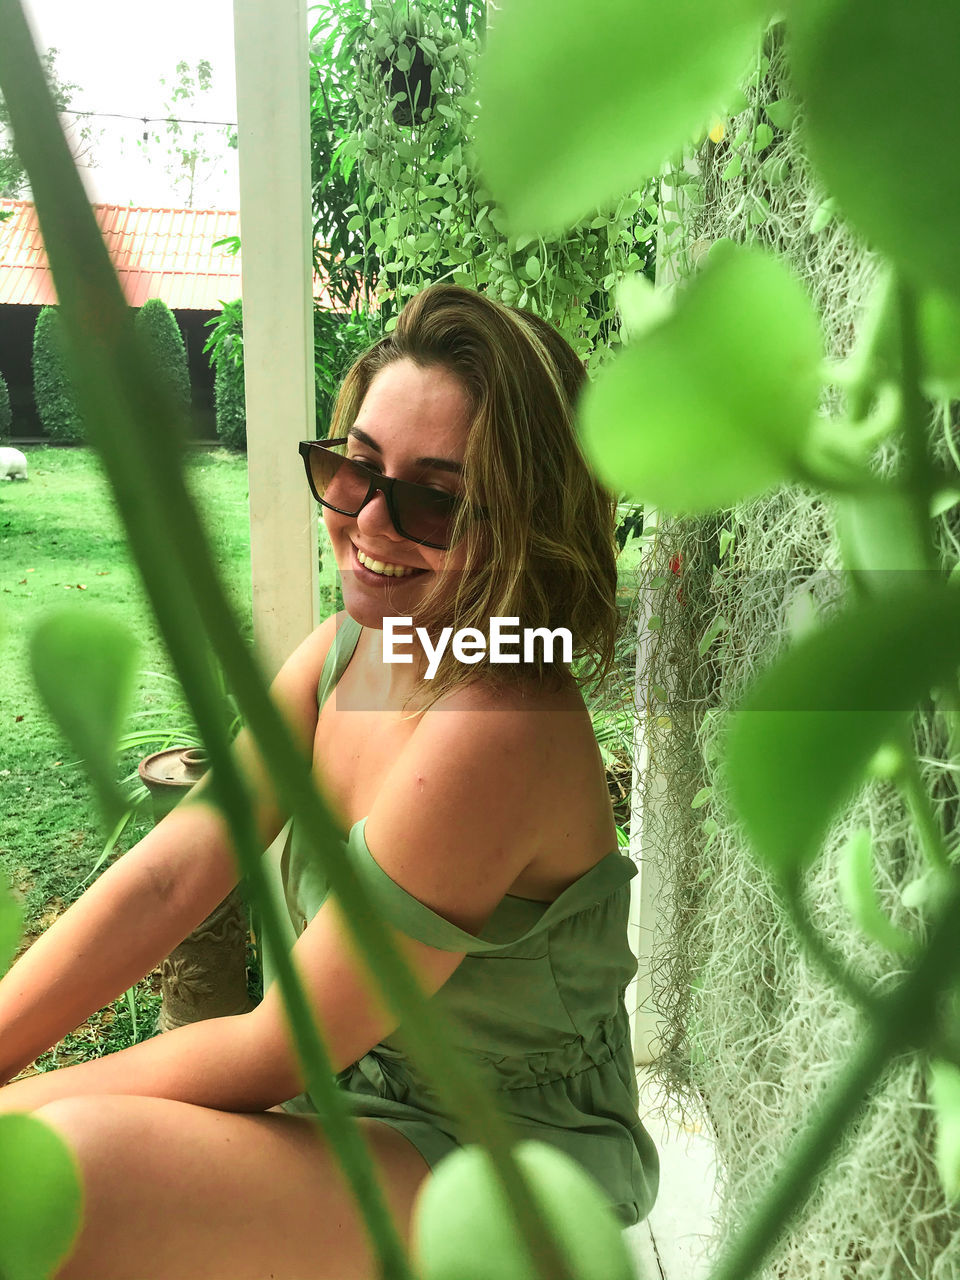 Smiling woman wearing sunglasses sitting by plants